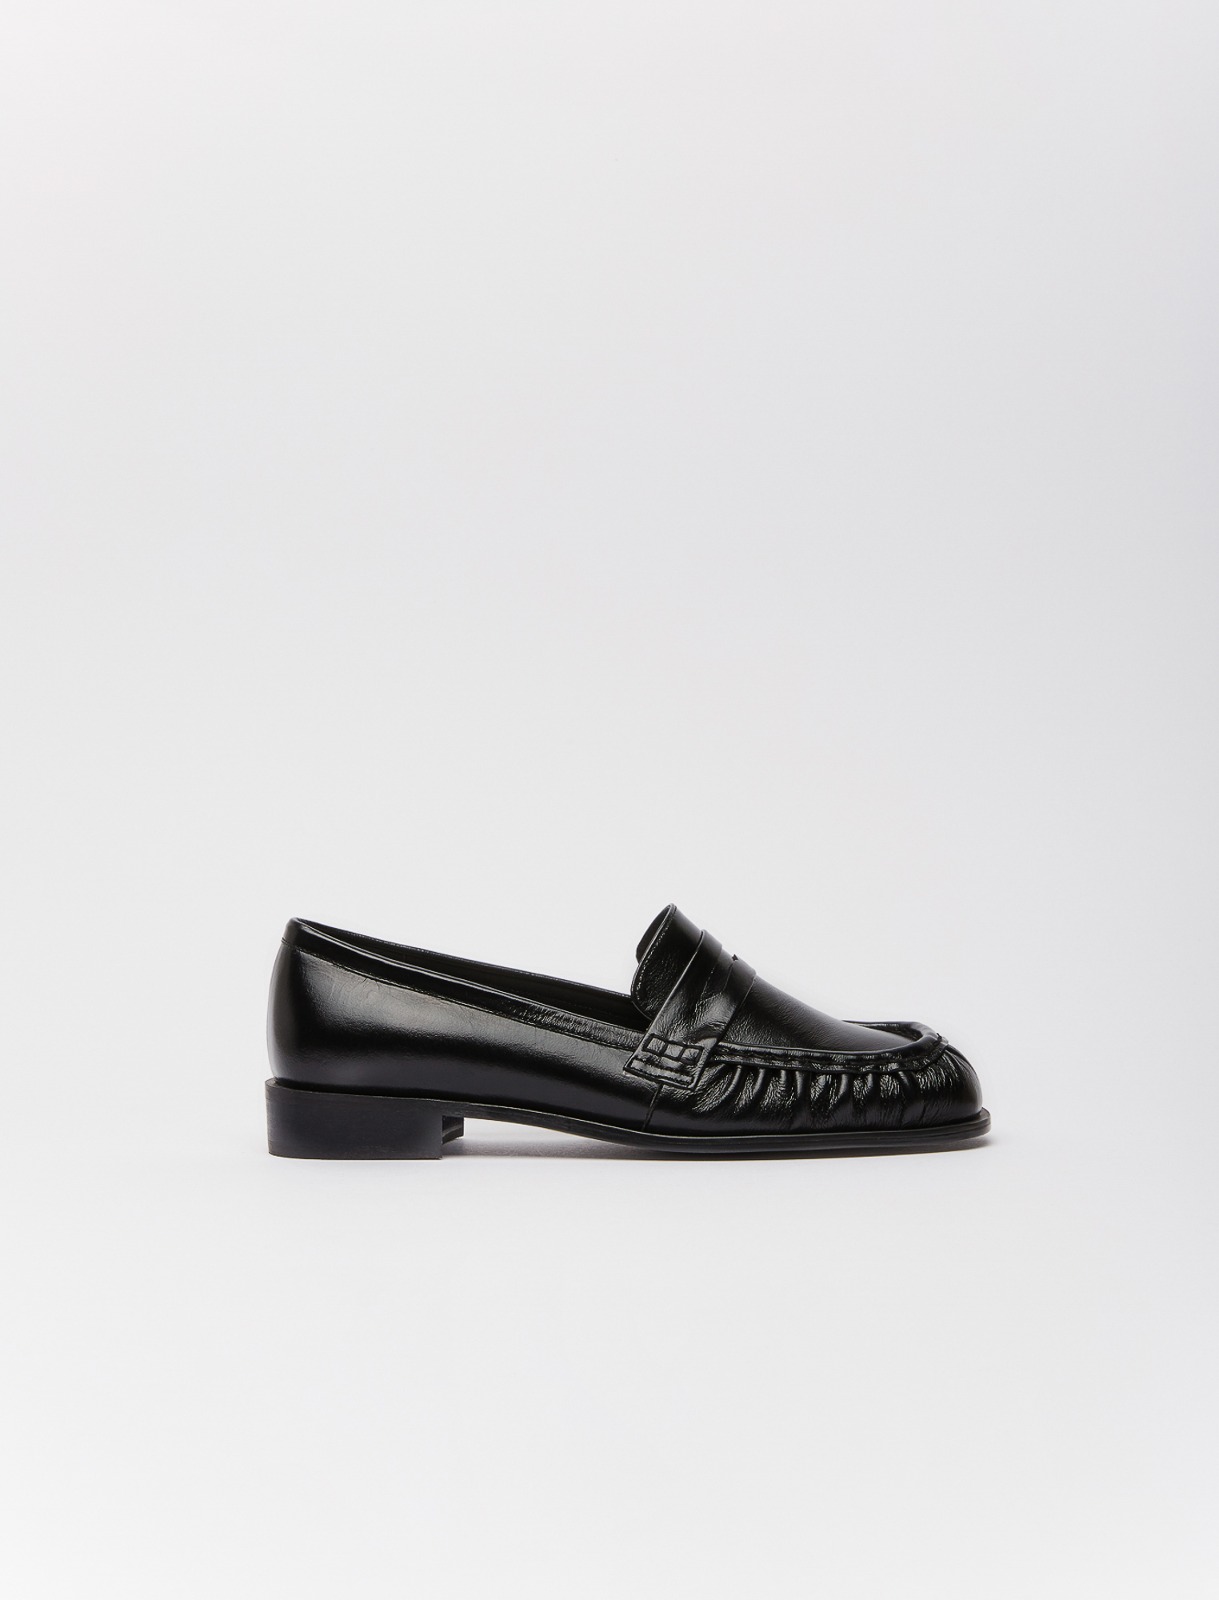 020 Le classic penny loafers (Black)